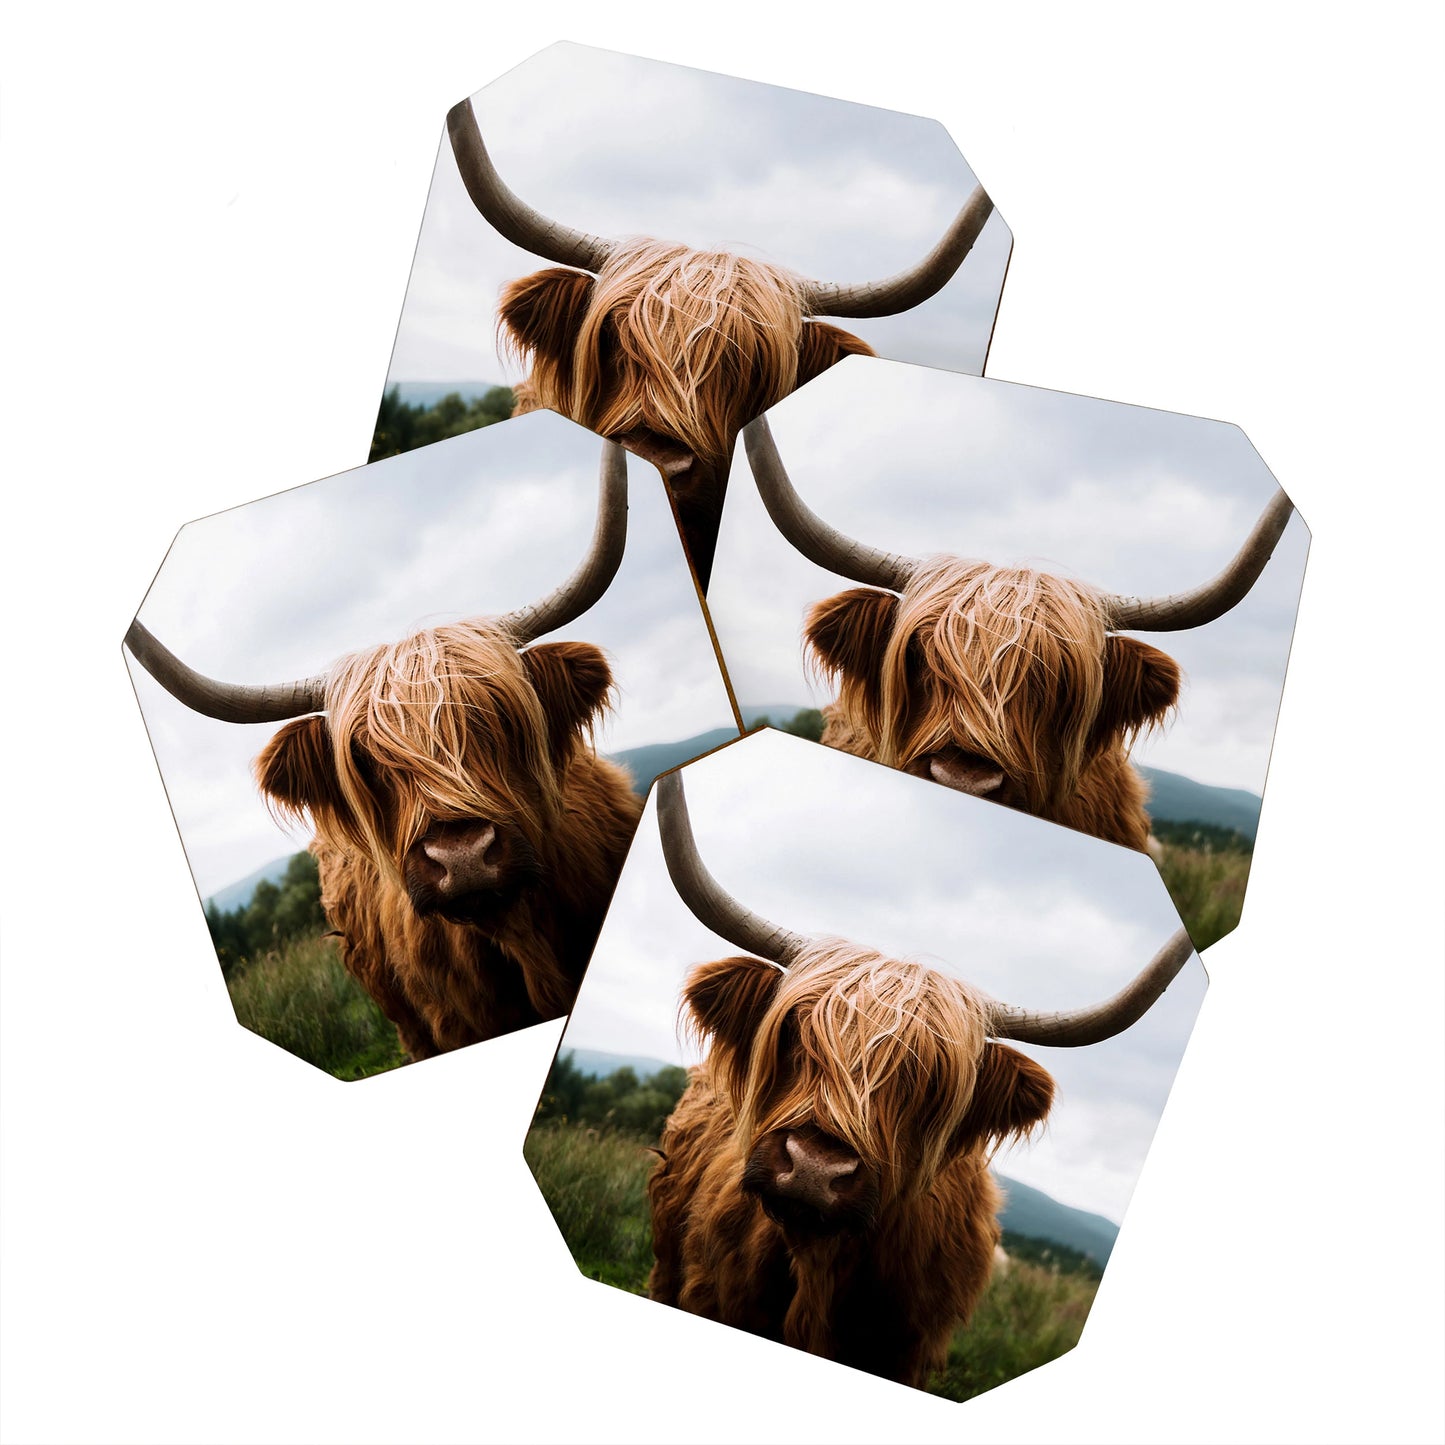 Scottish Highland Cattle Coaster Set - coaster, coasters, cow, cows, cute cows, decoration, gift, gift idead, gift ideas, high land, high land cow, highland, home, home decor, photo, photography, western, western home decor - scottish highland cattle - Baha Ranch Western Wear